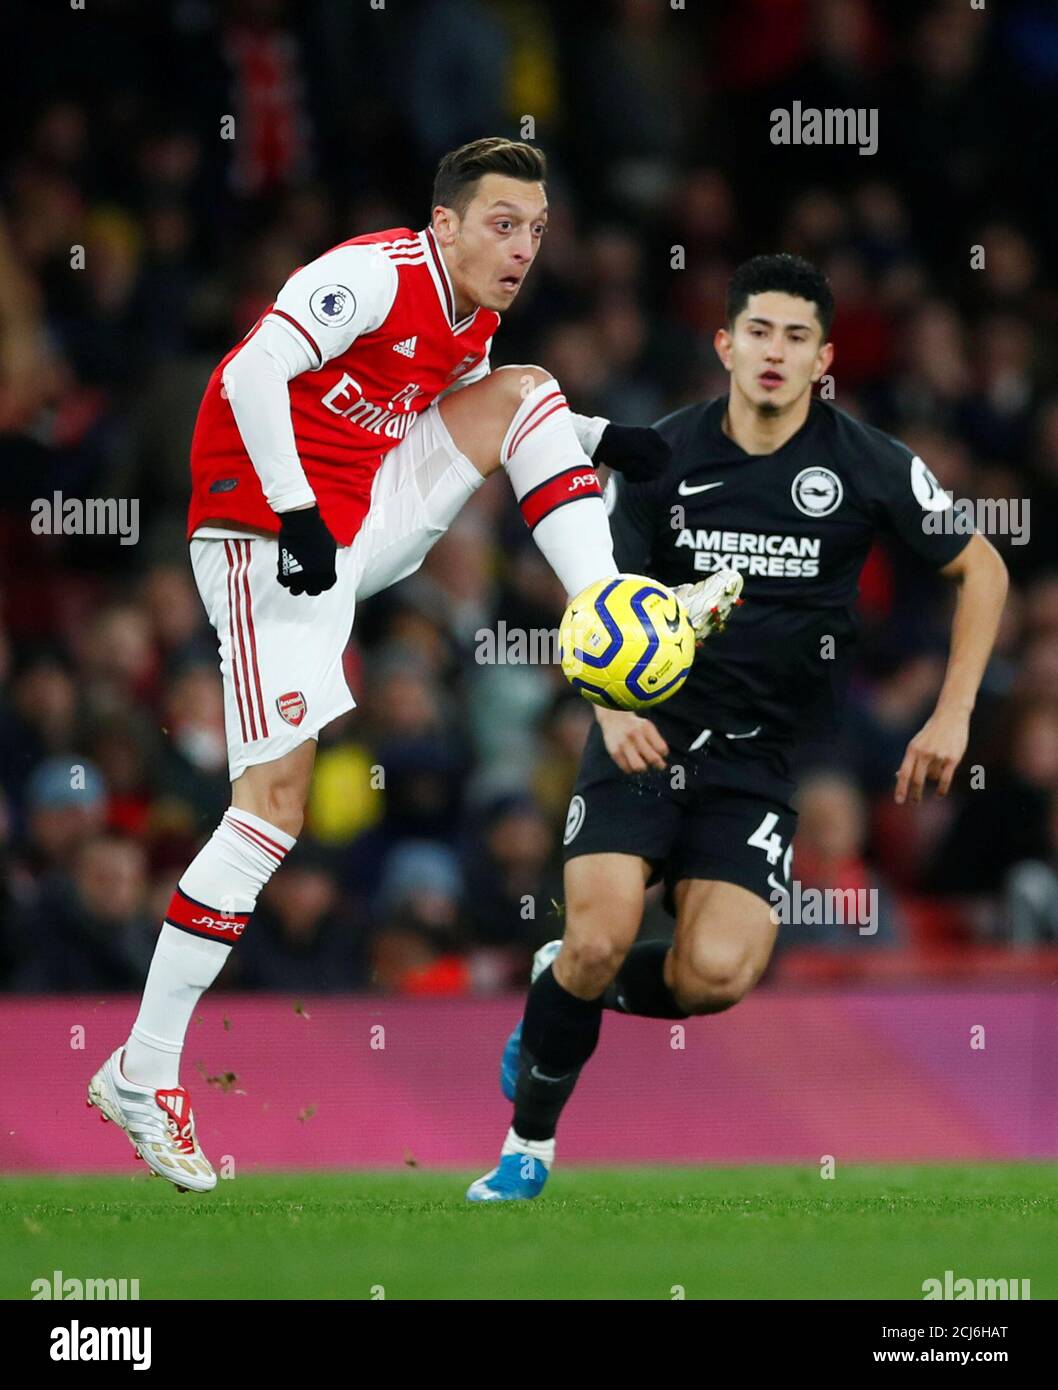 Soccer Football - Premier League - Arsenal v Brighton & Hove Albion - Emirates Stadium, London, Britain - December 5, 2019   Arsenal's Mesut Ozil in action         REUTERS/Eddie Keogh    EDITORIAL USE ONLY. No use with unauthorized audio, video, data, fixture lists, club/league logos or 'live' services. Online in-match use limited to 75 images, no video emulation. No use in betting, games or single club/league/player publications.  Please contact your account representative for further details. Stock Photo